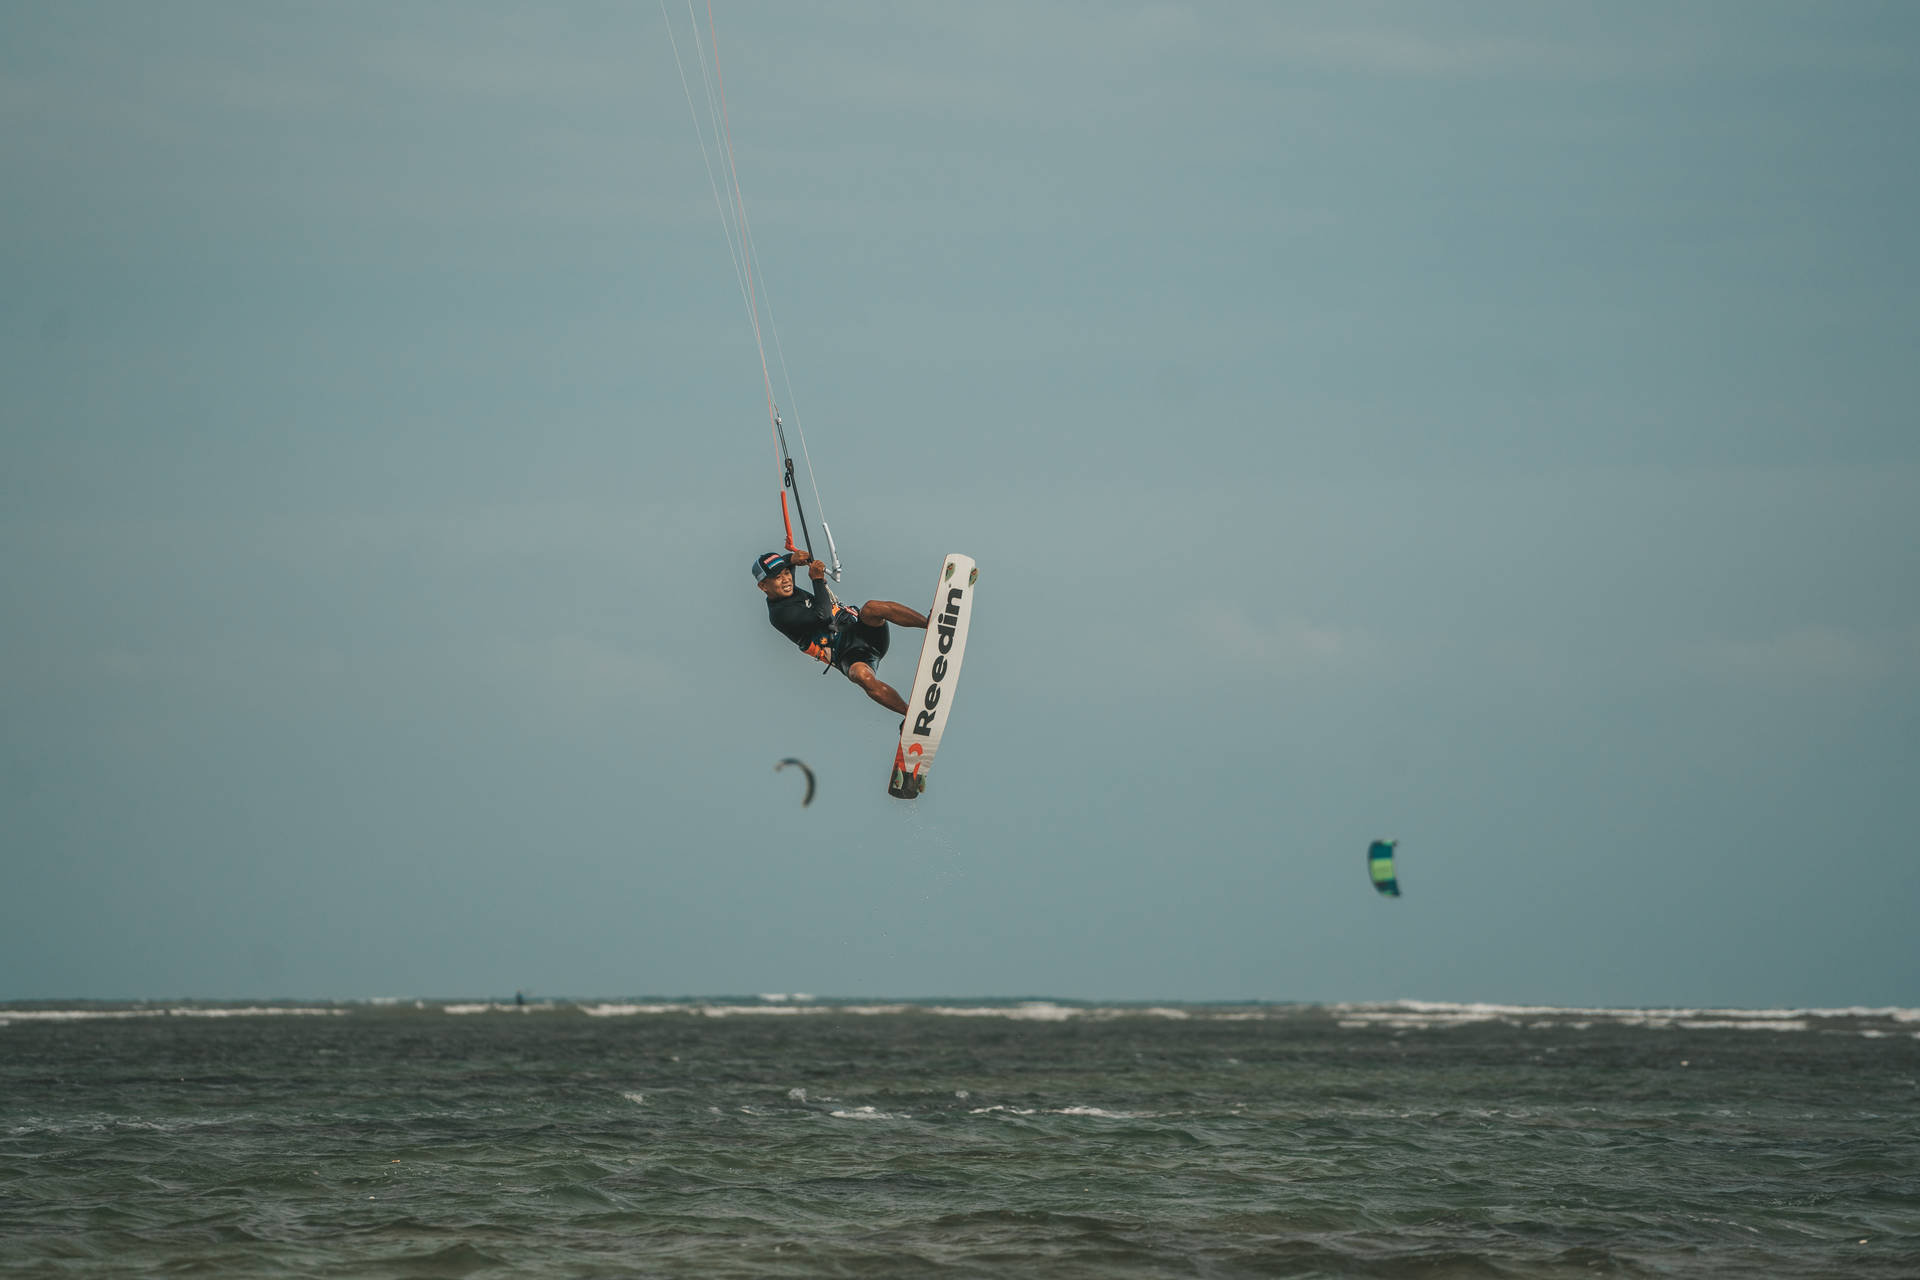 Tilted Windsurfing In Air